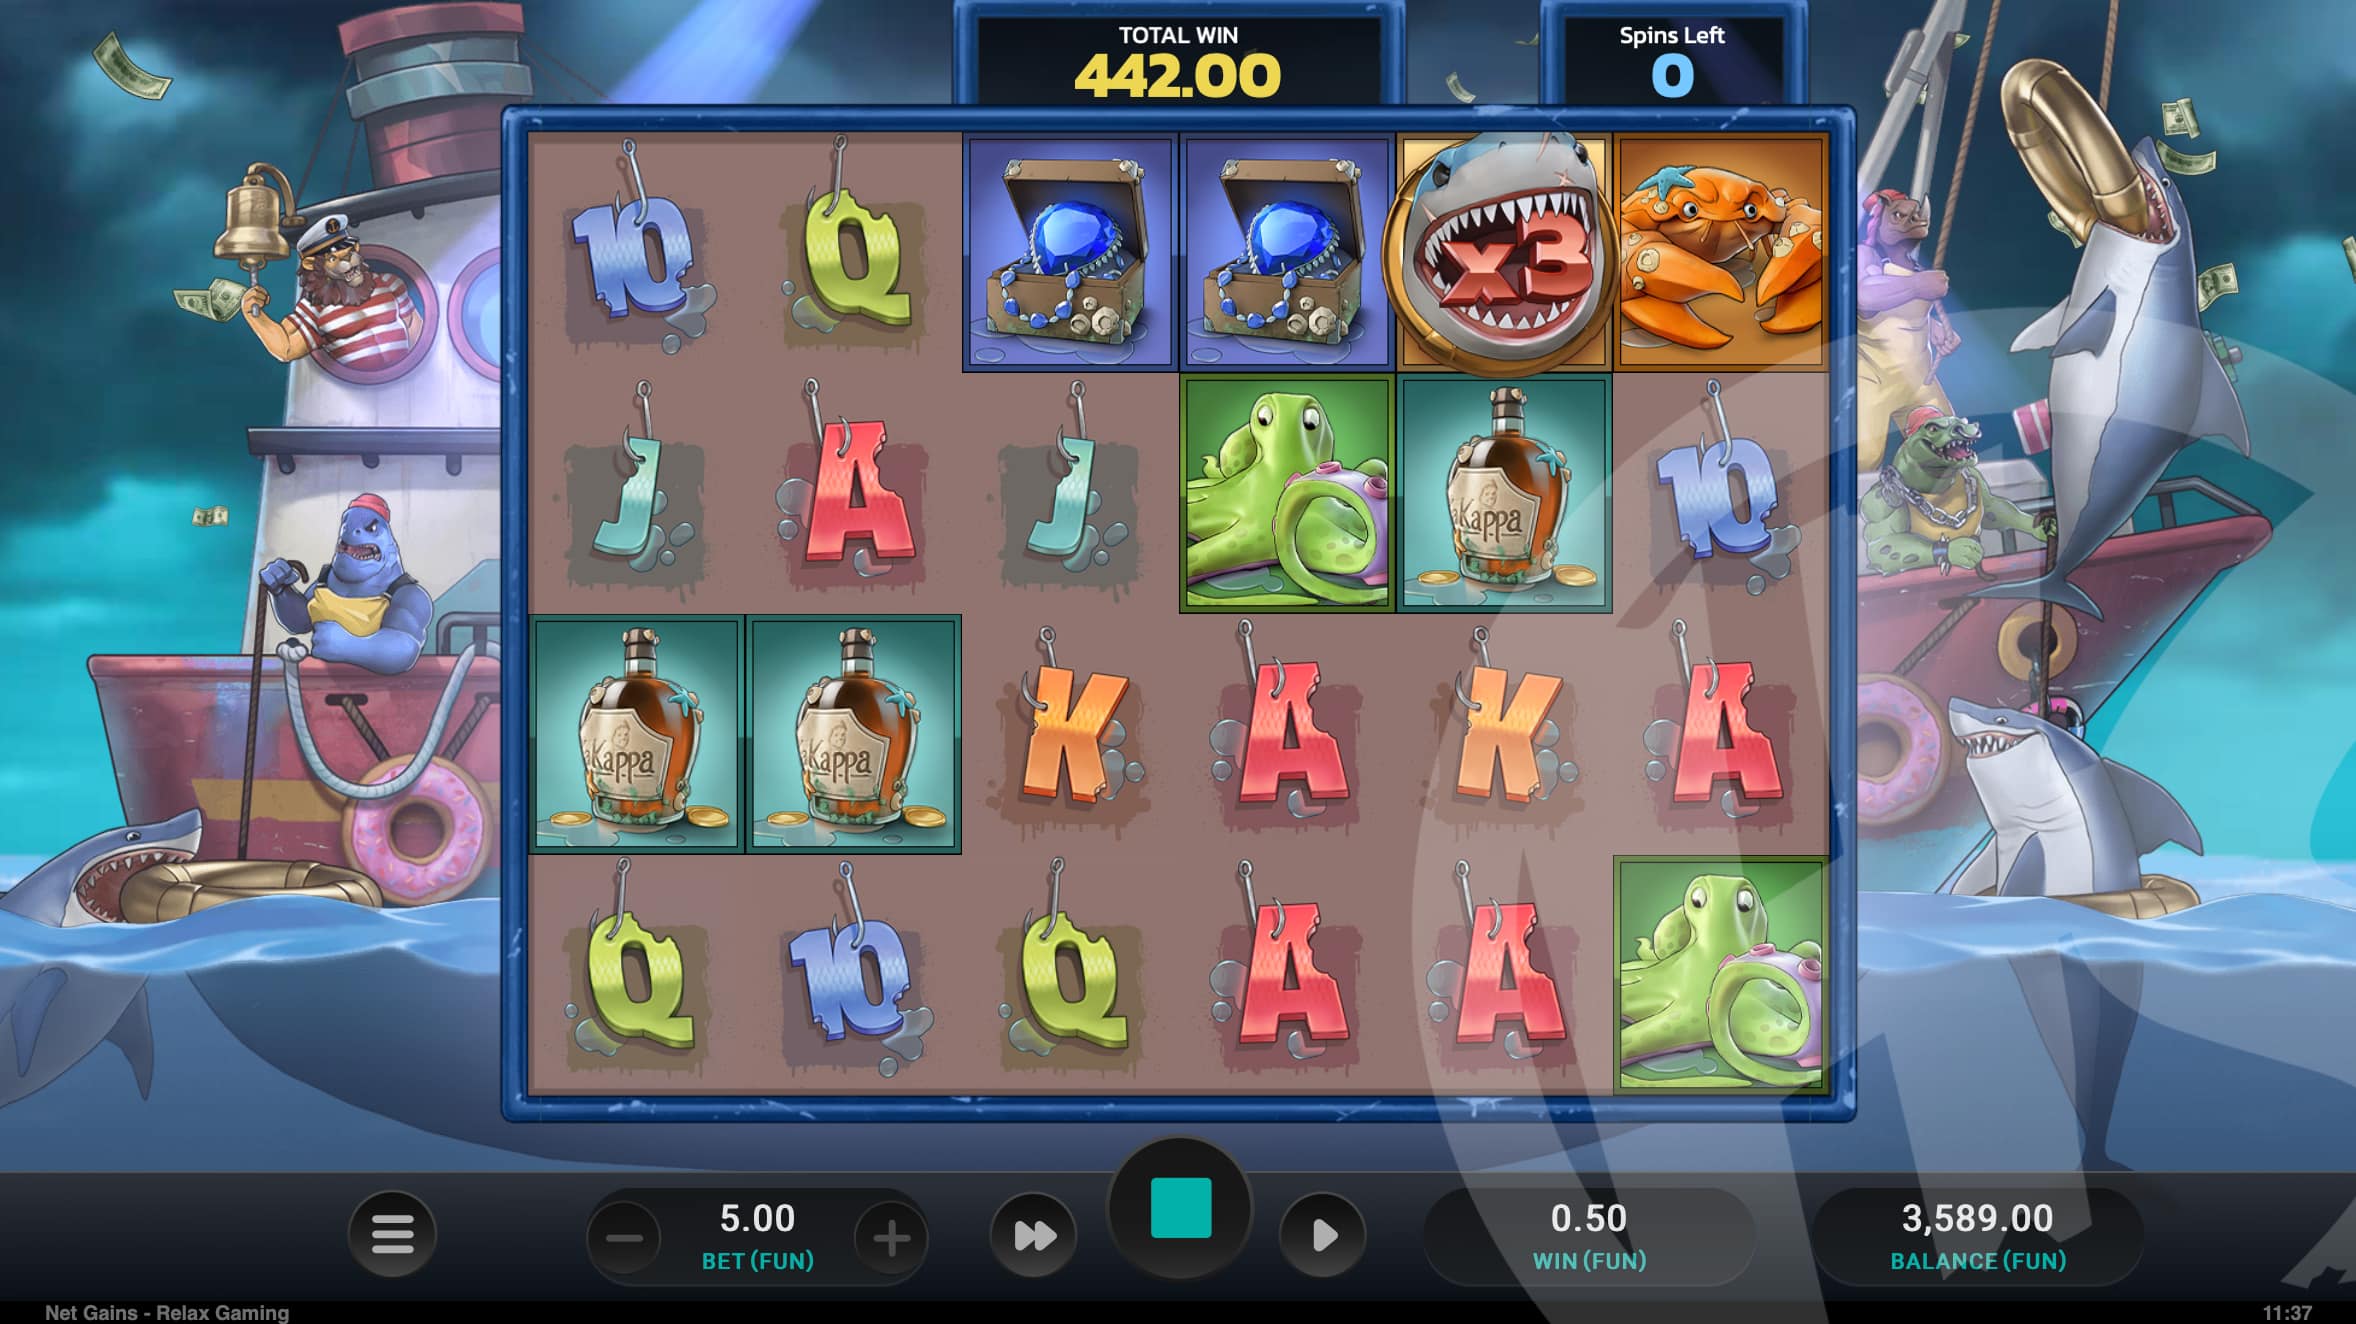 Net Gains Stacked Wilds Free Spins